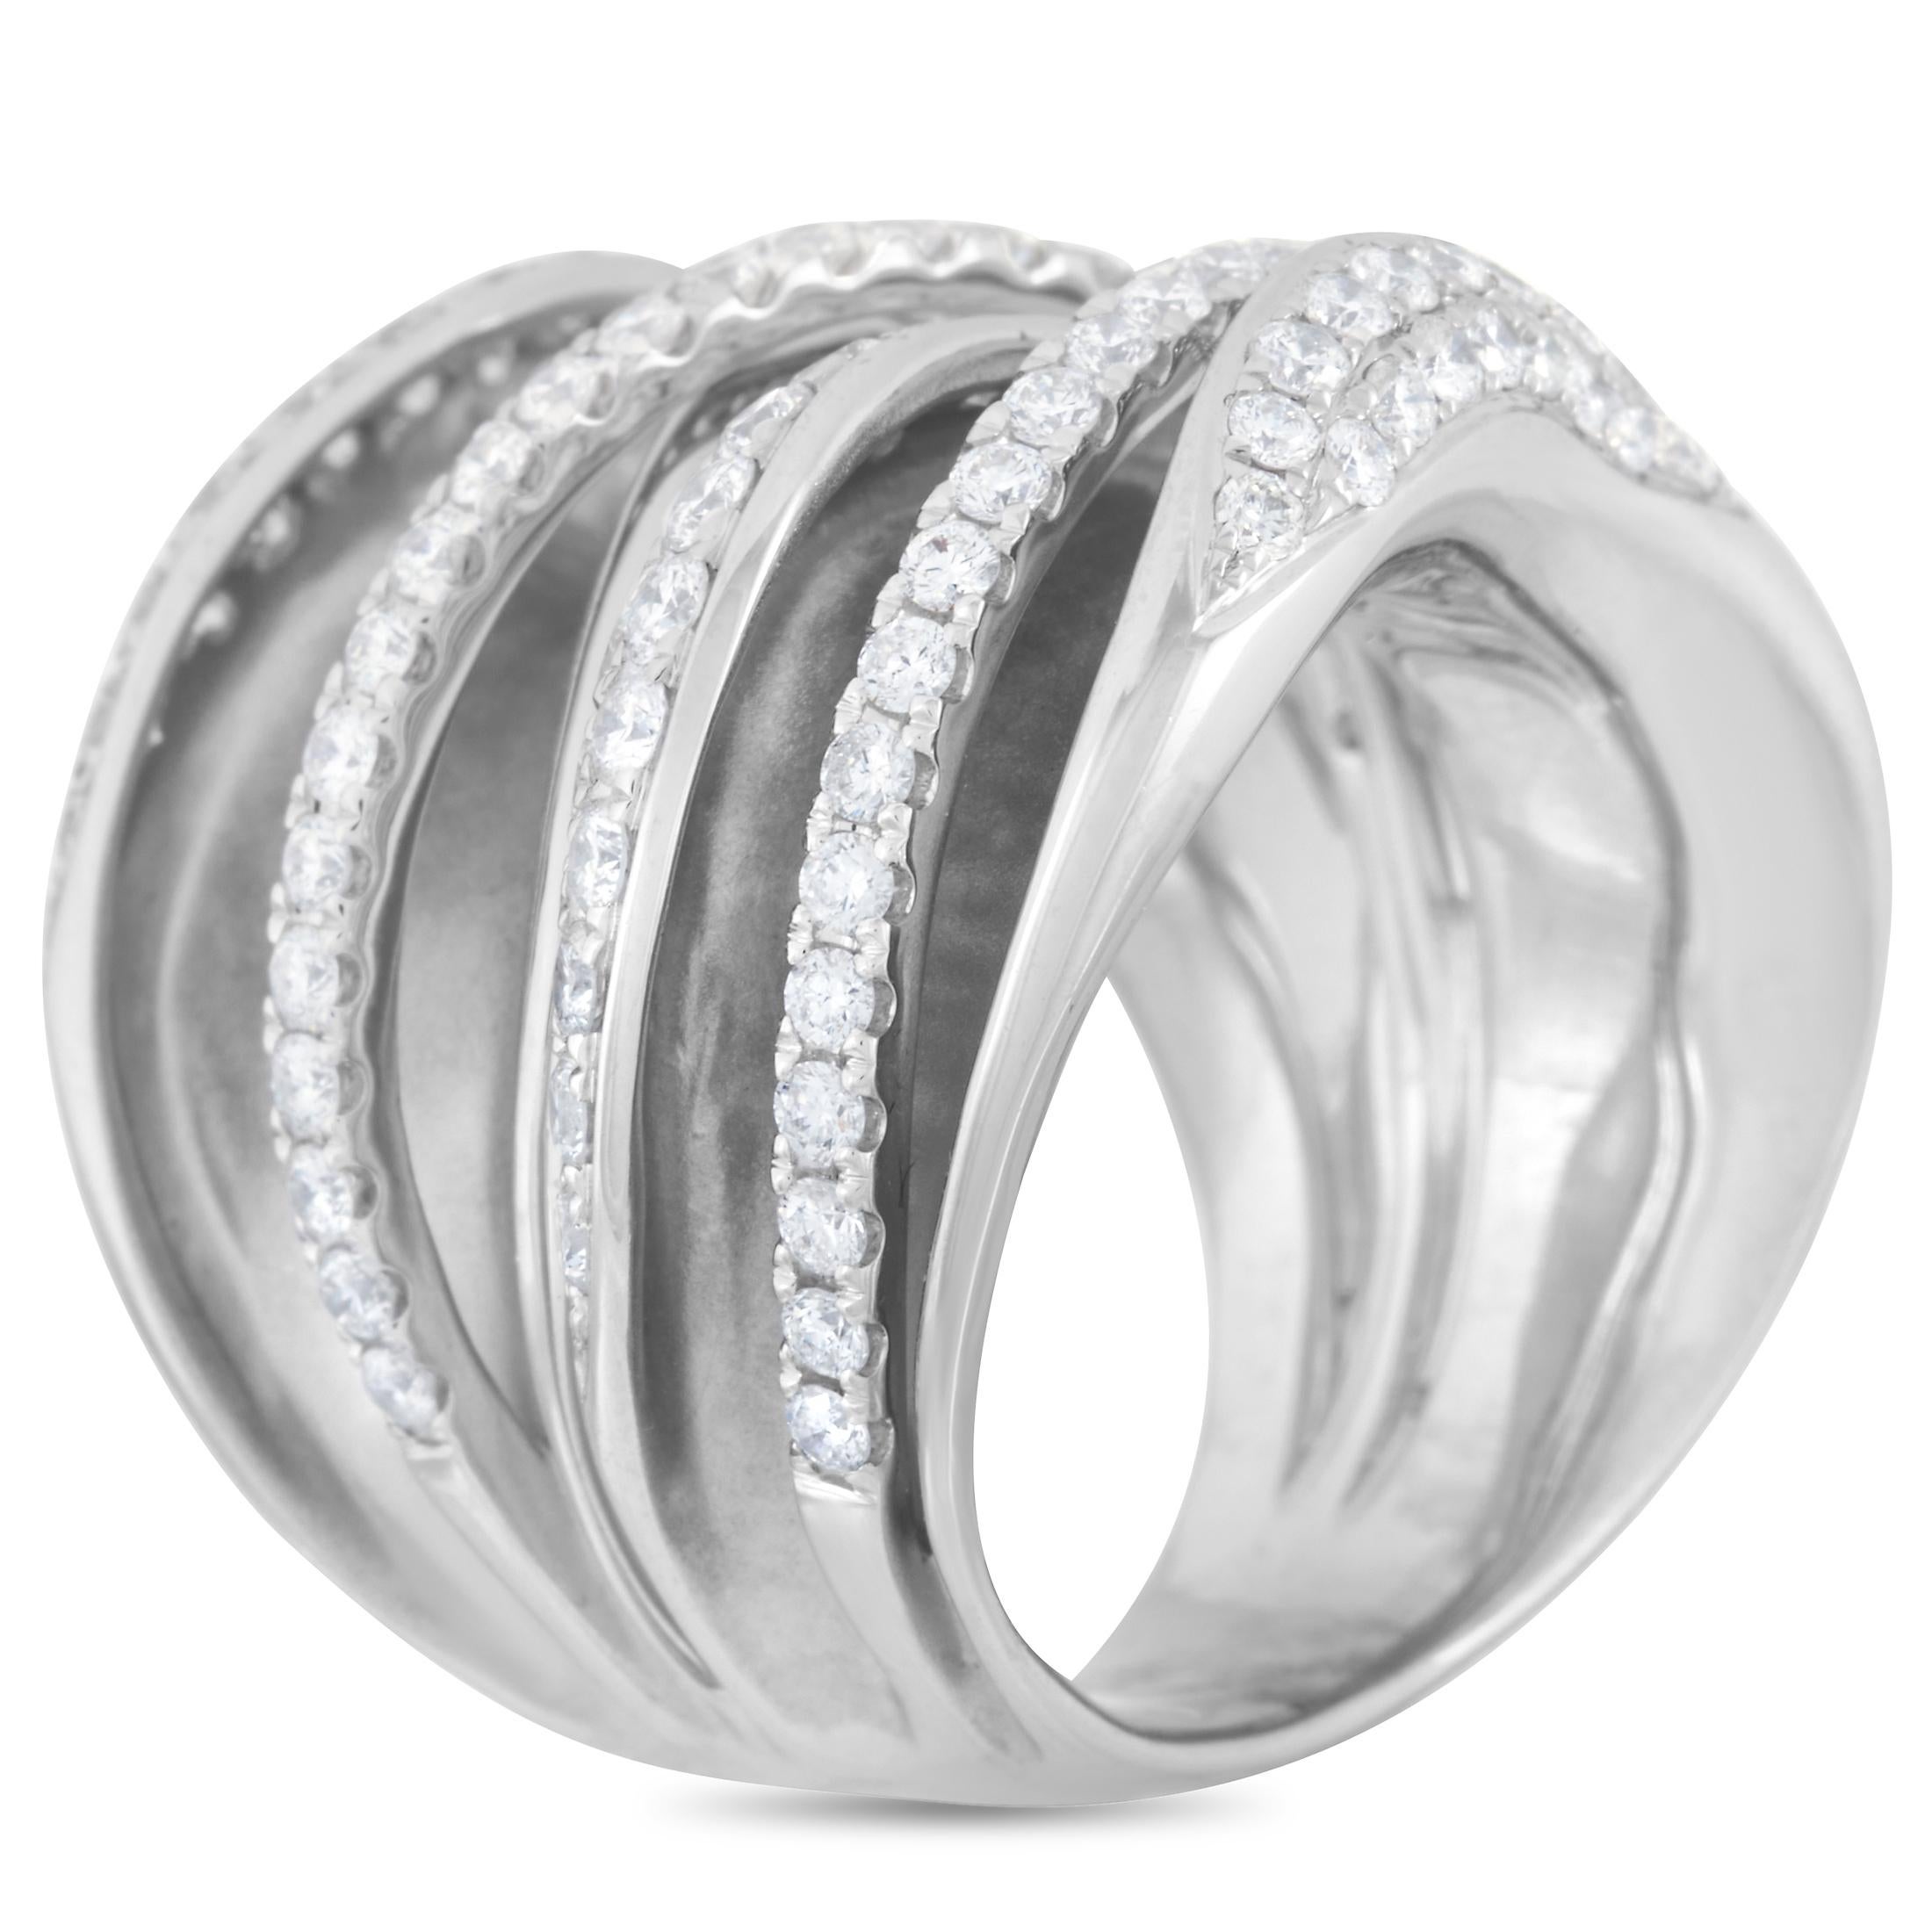 The LB Exclusive 18K White Gold 1.90 carat Diamond Multi-Row Crossover Ring features overlapping rows of diamonds and polished 18K white gold. The ring's top dimensions measure 24mm by 22mm and features the mesmerizing crossover of sparkle and